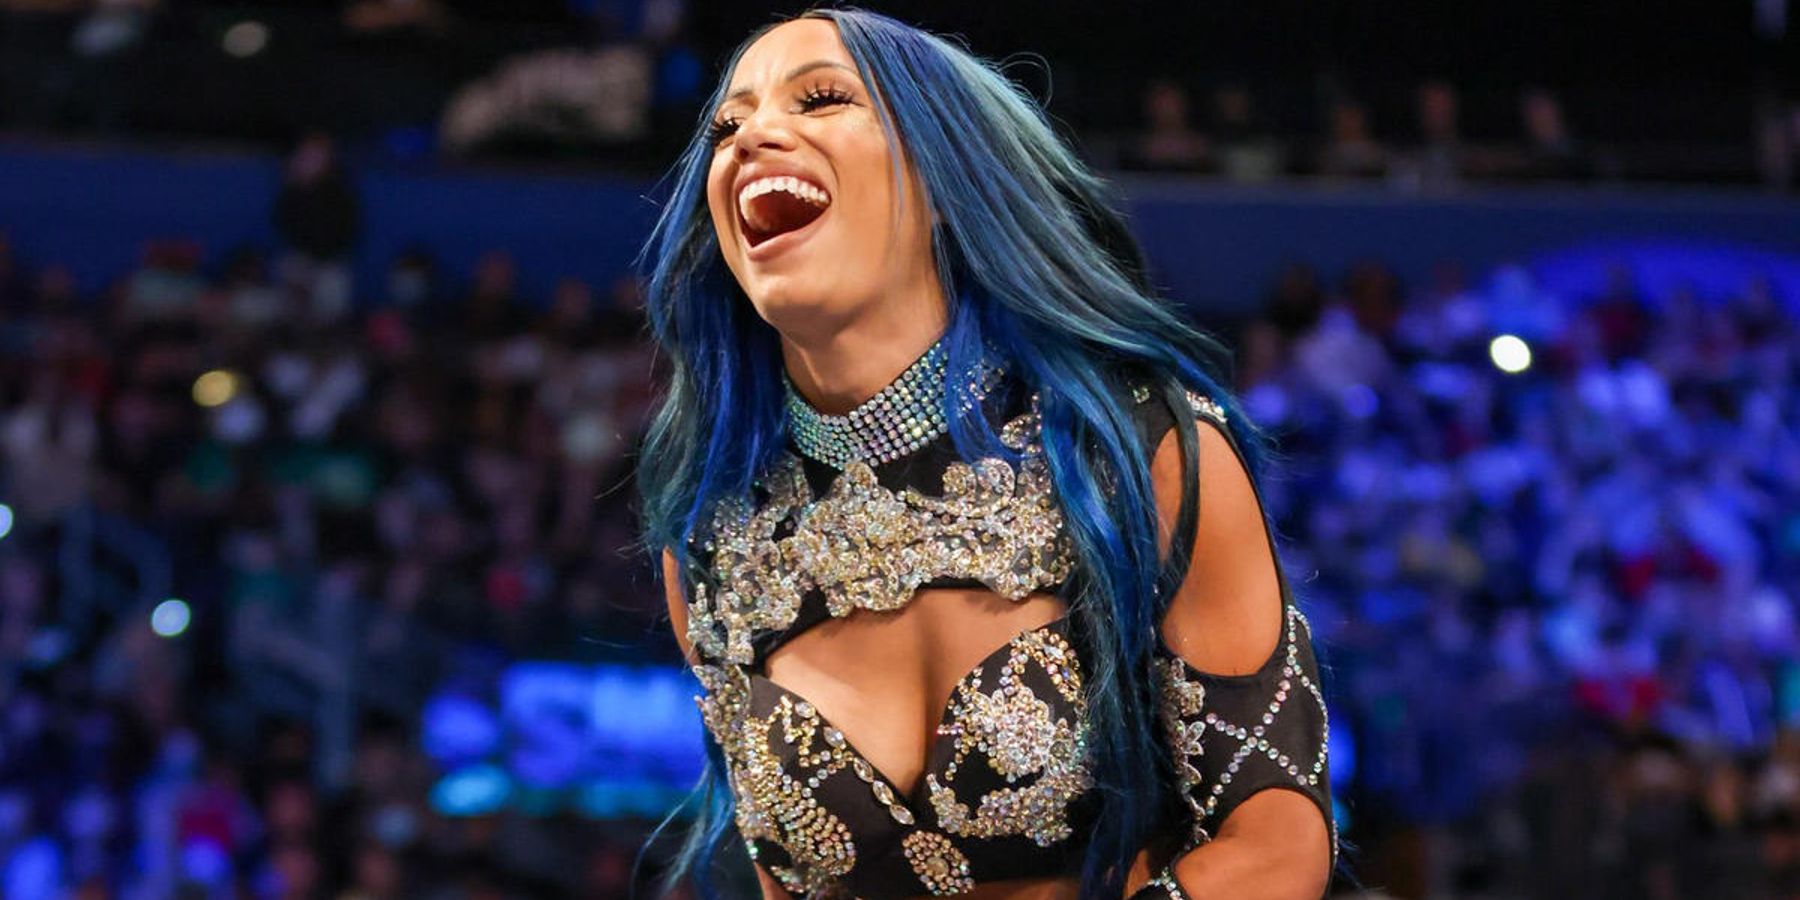 Sasha Banks laughs after insulting members of WWE's women's division on an episode of SmackDown in 2022.